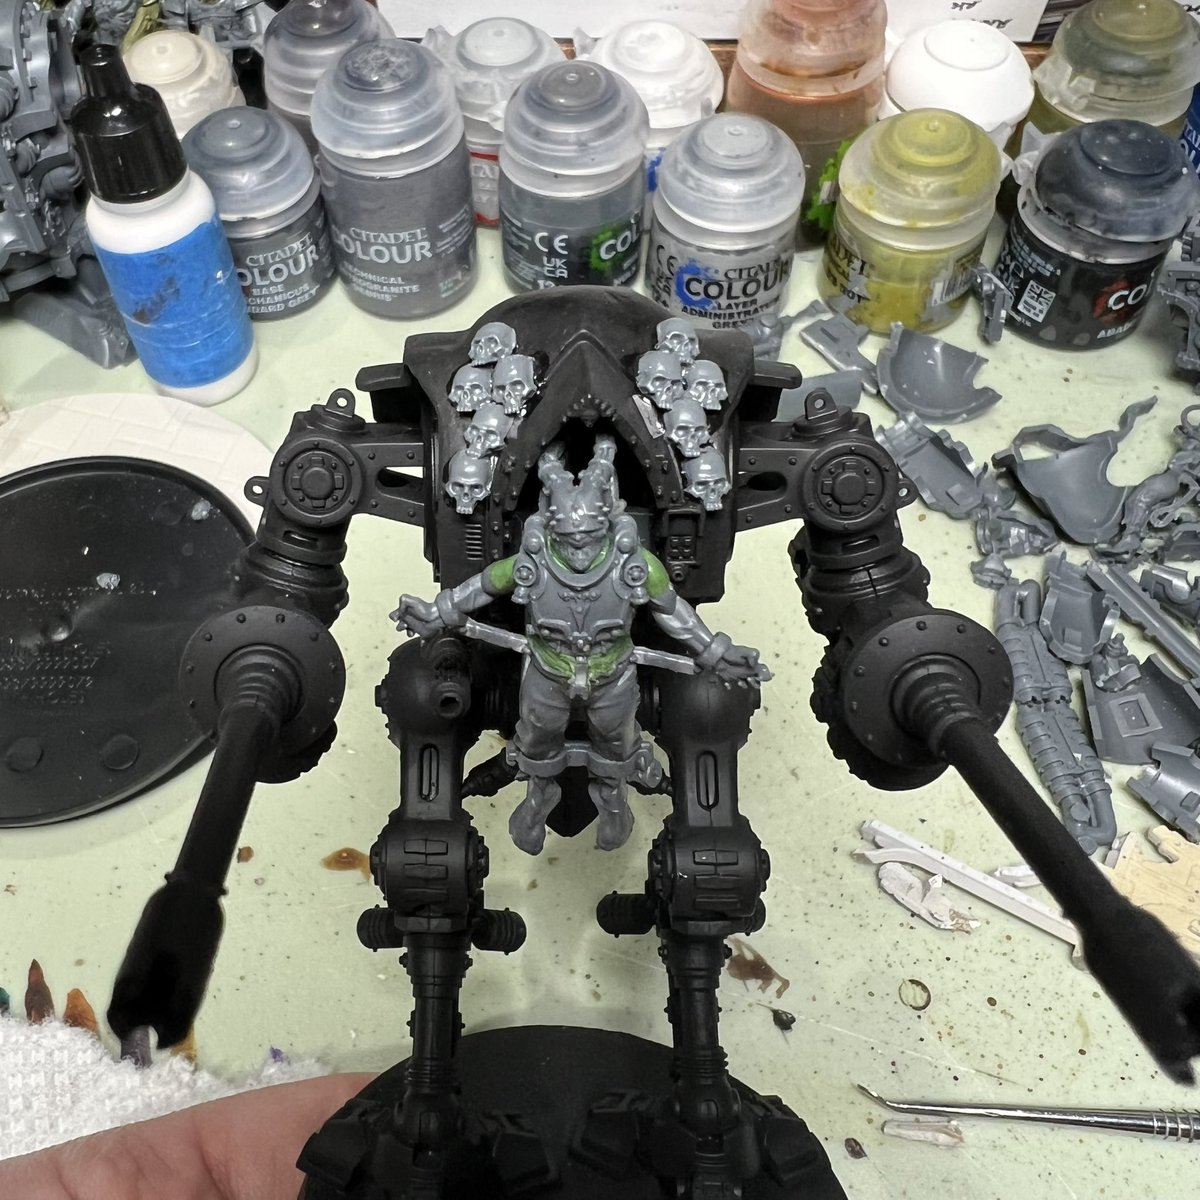 Dear reader, you join me on #HobbyStreak day 415 as I completely lose what's left of my mind... Yes, I have decided to bedazzle the carapace with skulls.